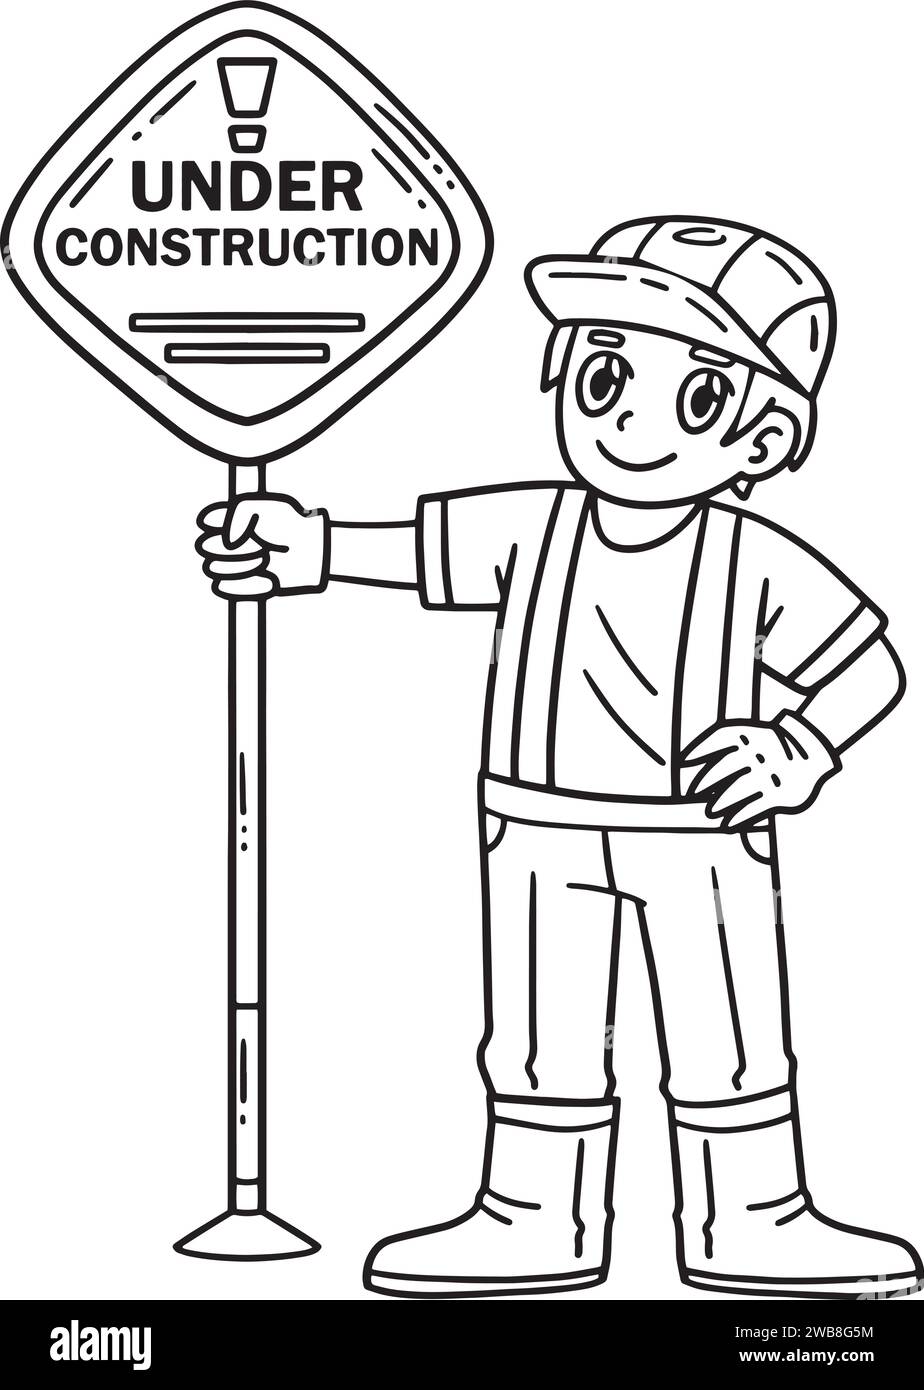 Construction Worker Holding Signage Isolated  Stock Vector